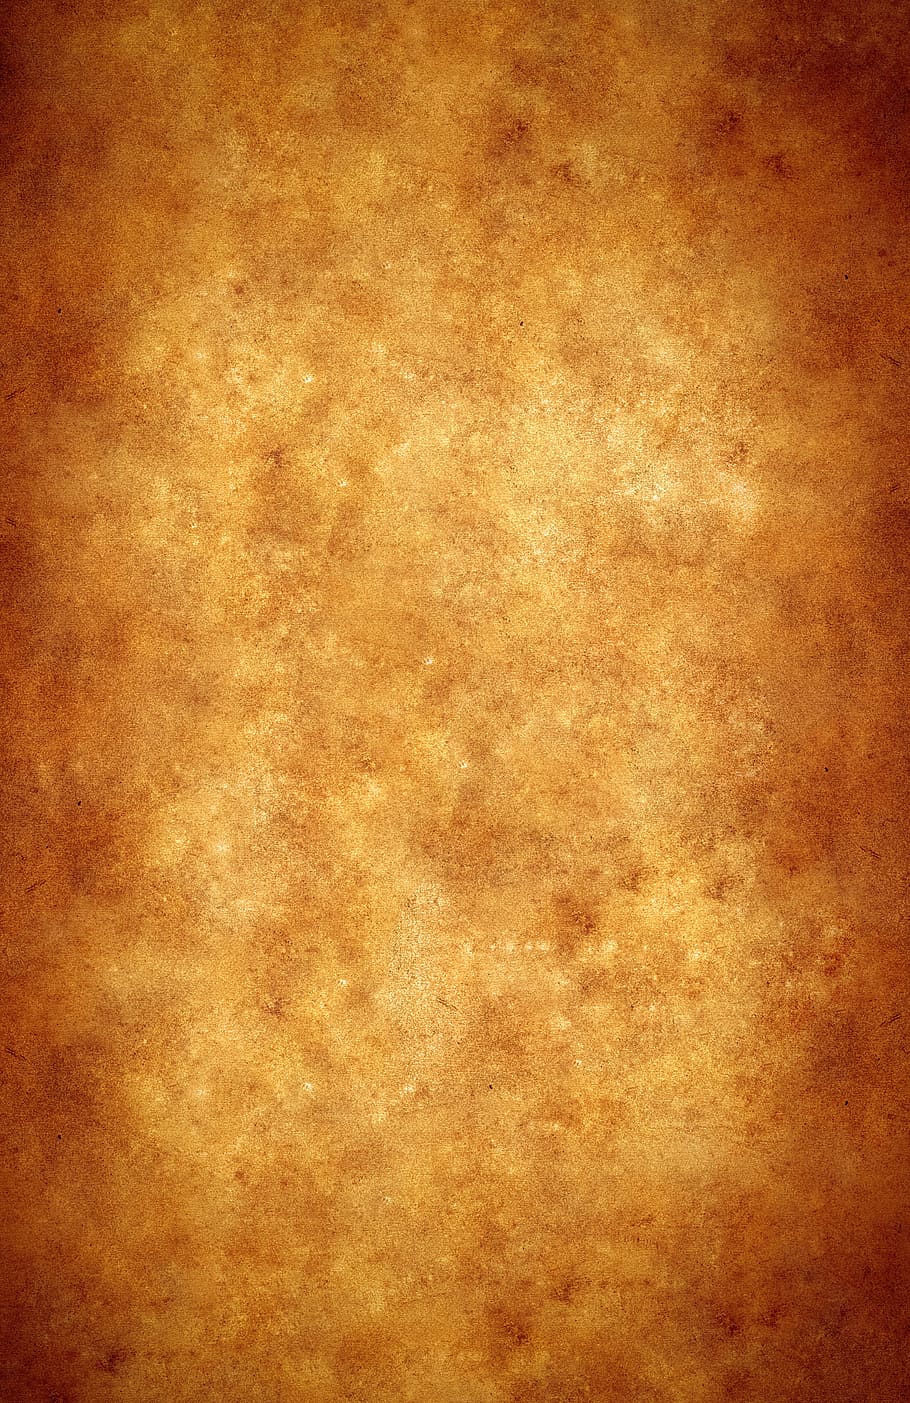 background, grunge, paper, old, brown, retro, paint, pattern, yellow, dirt